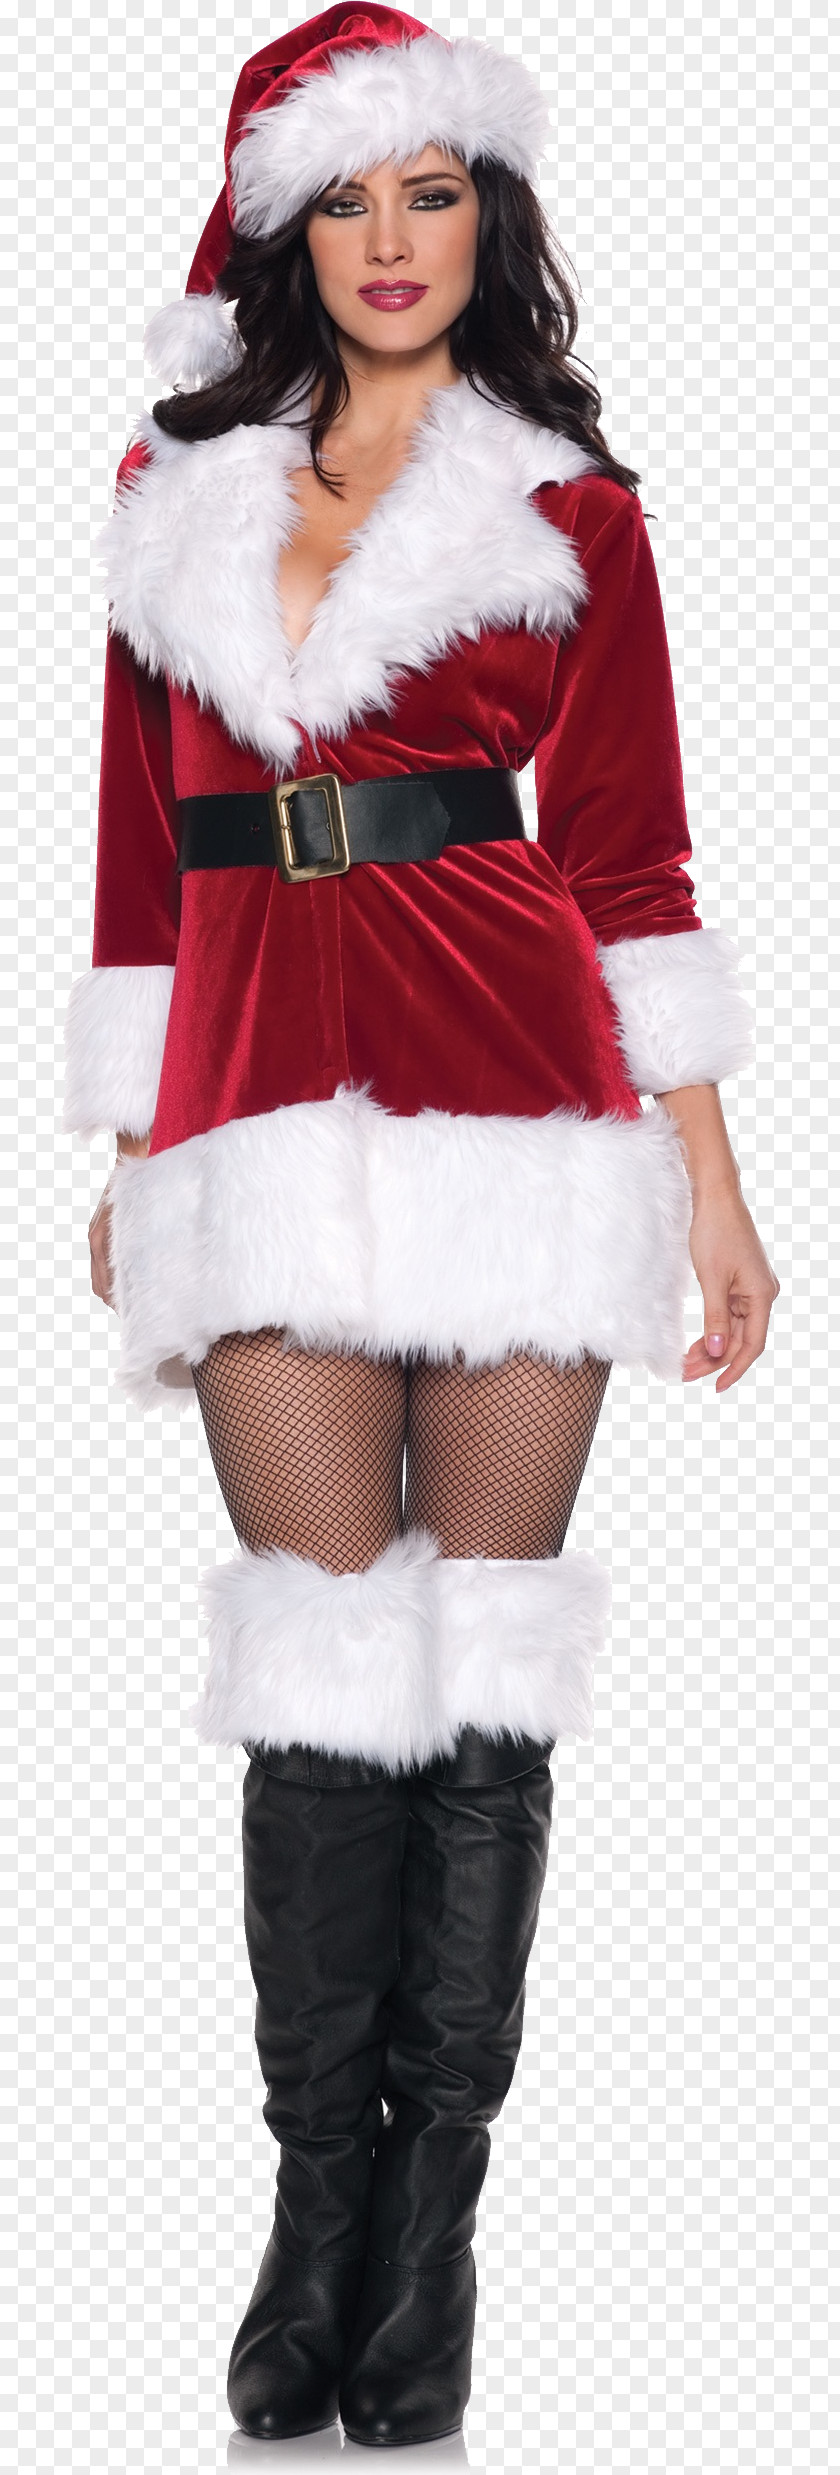 Christmas Mrs. Claus Santa Costume Suit Clothing PNG